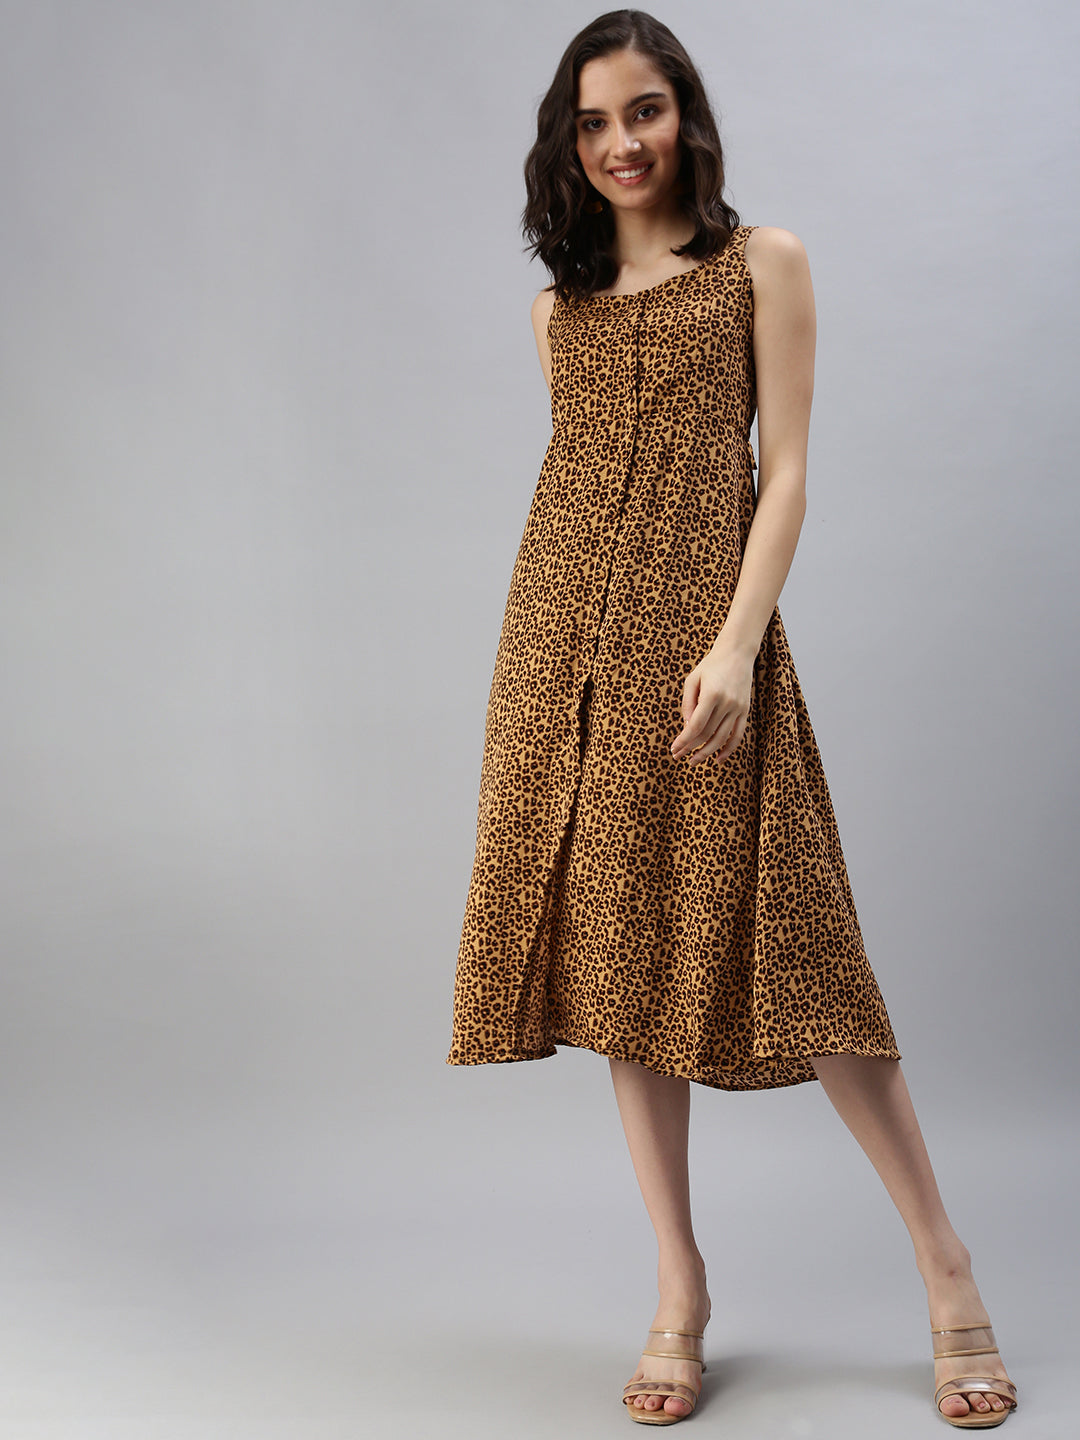 Women's Animal Camel Brown Fit and Flare Dress